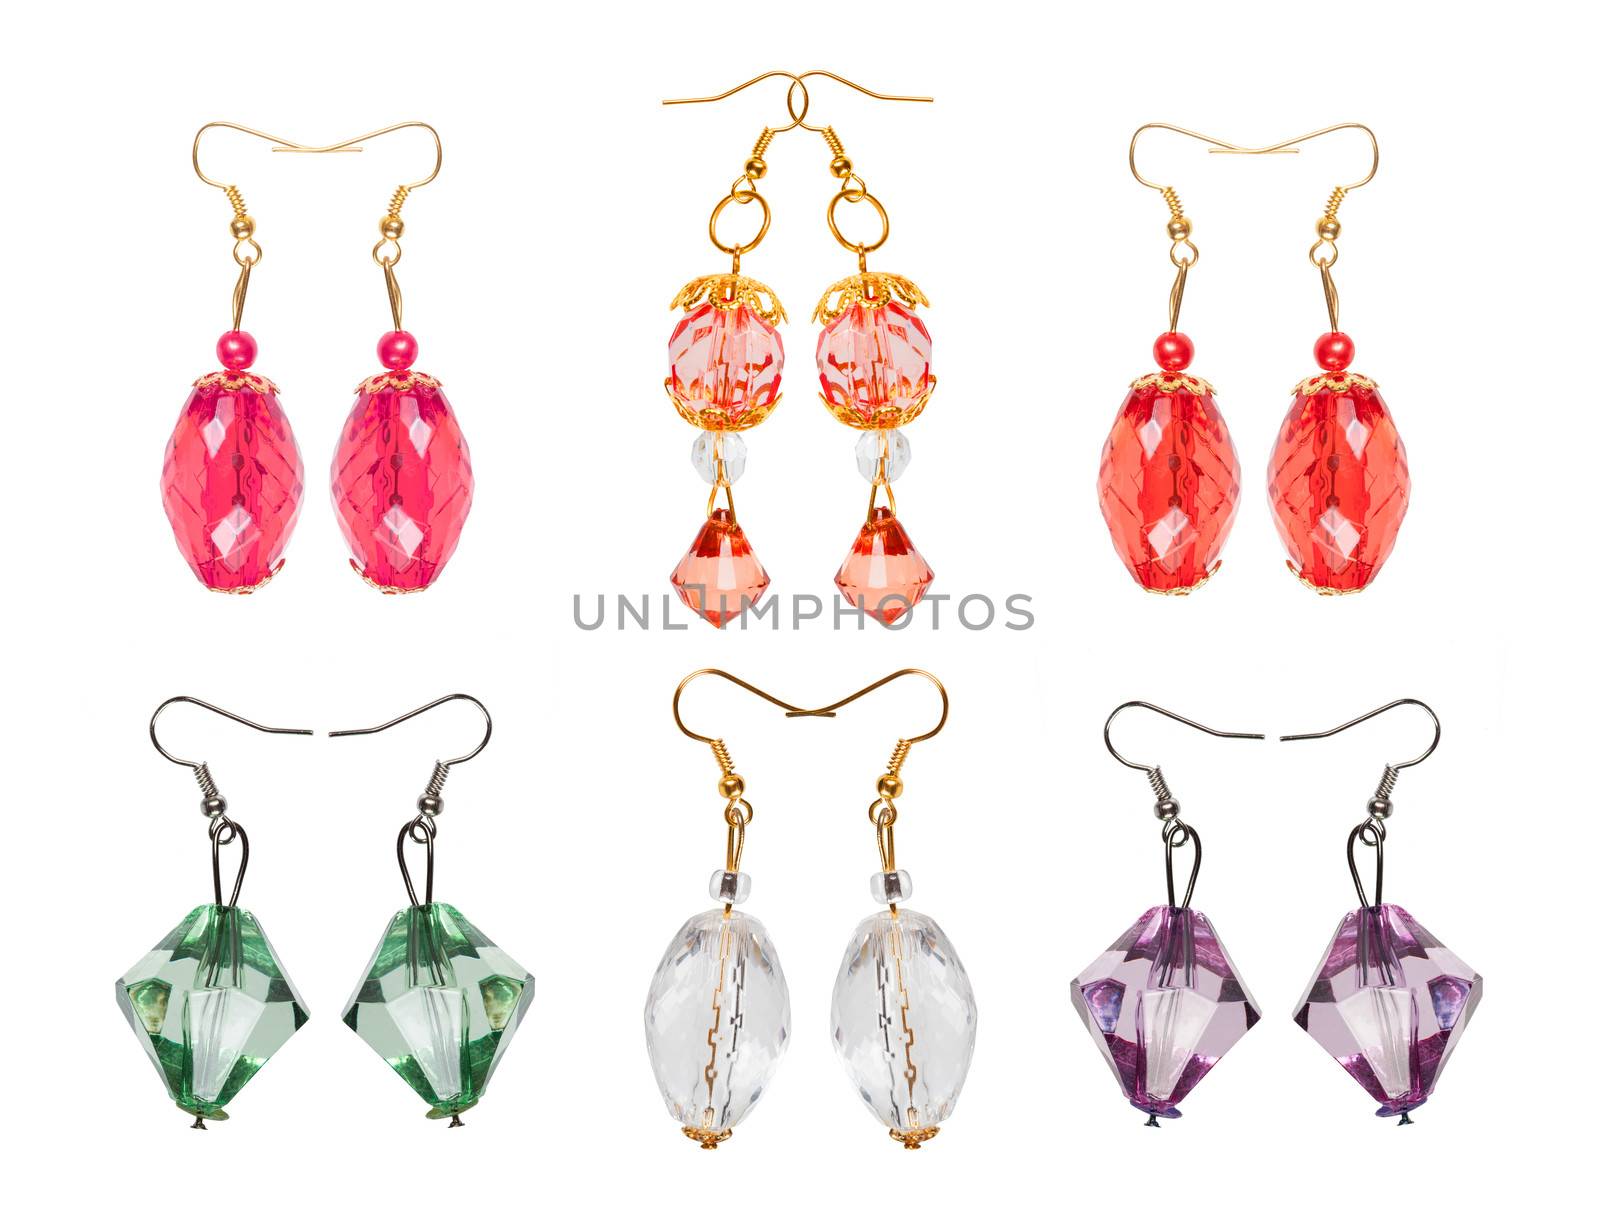 Earrings made of glass on a white background. six pairs  by AleksandrN